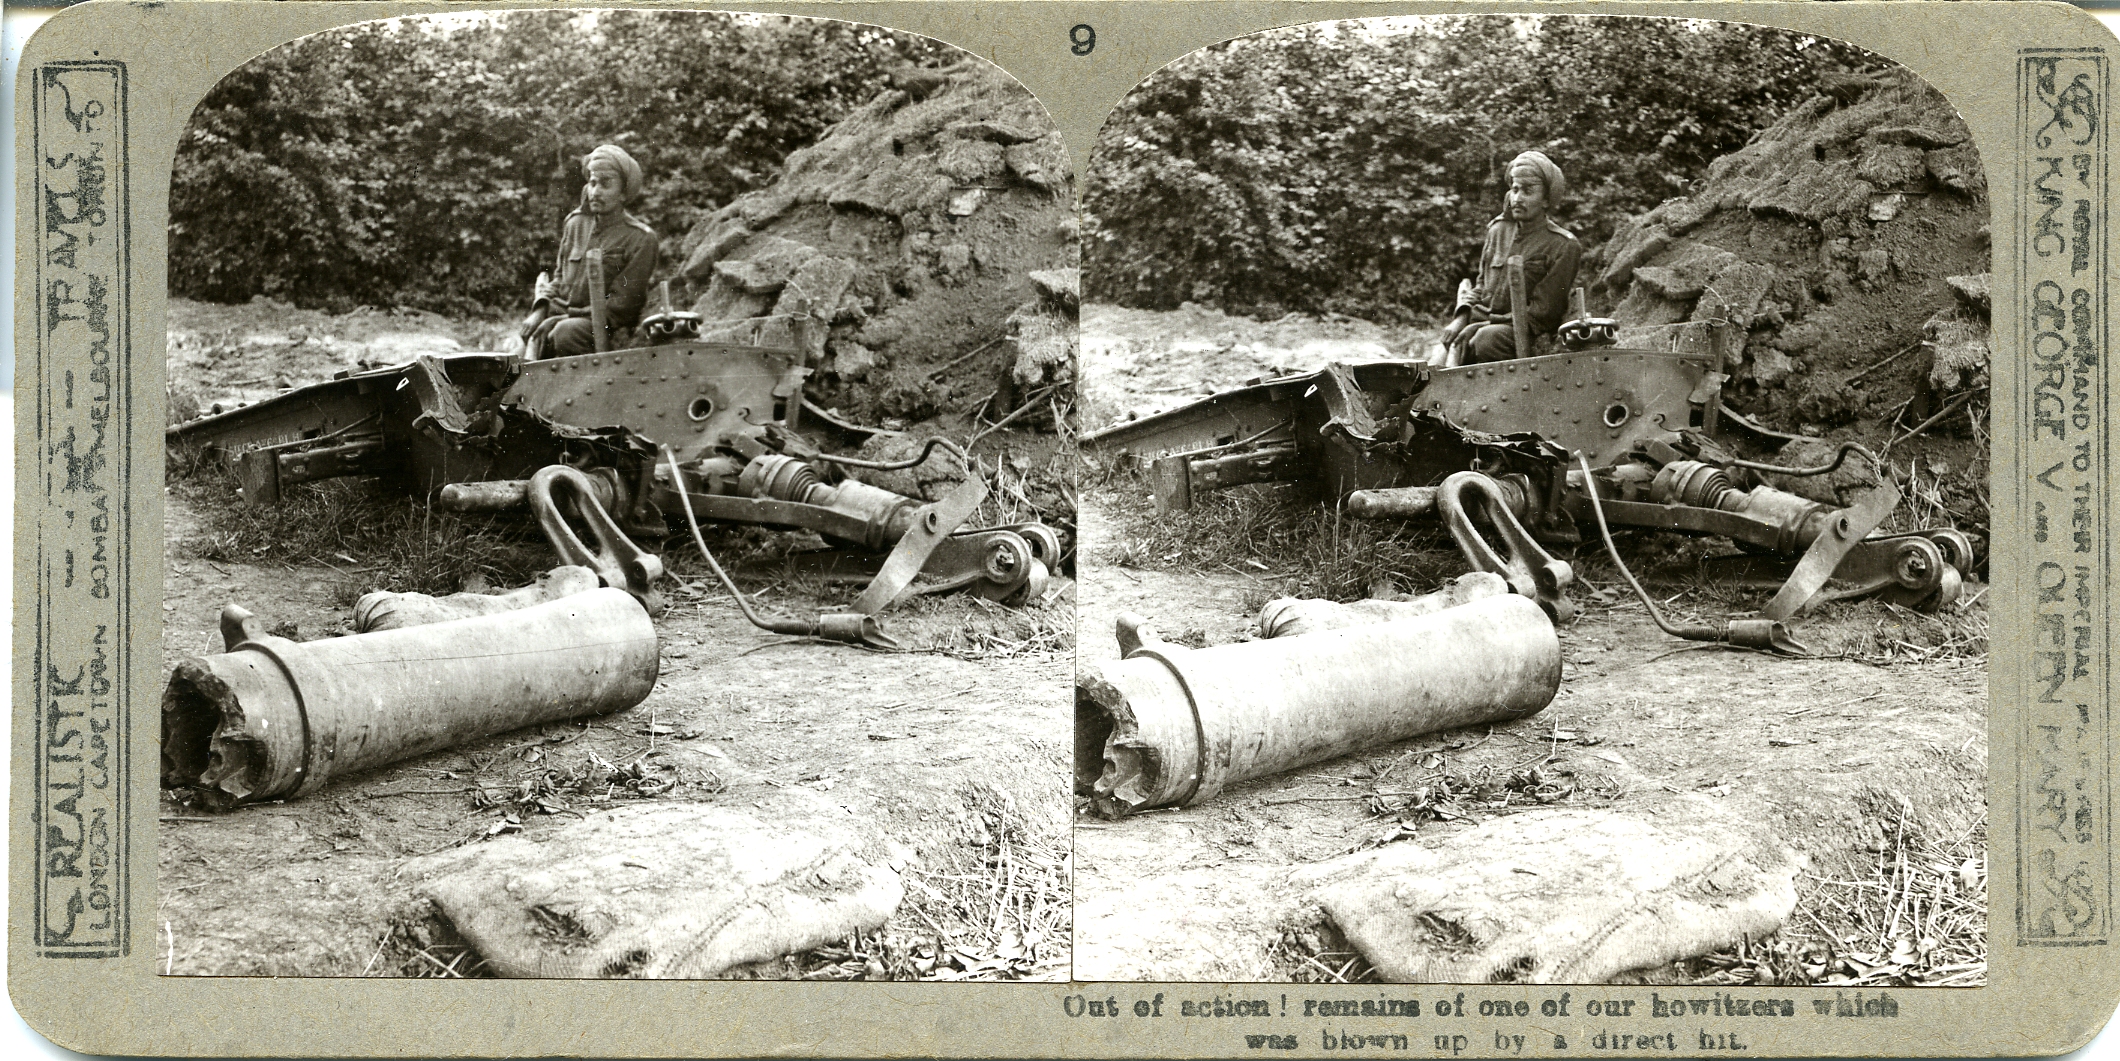 Out of action! Shattered remains of a luckless howitzer blown up by a direct German hit